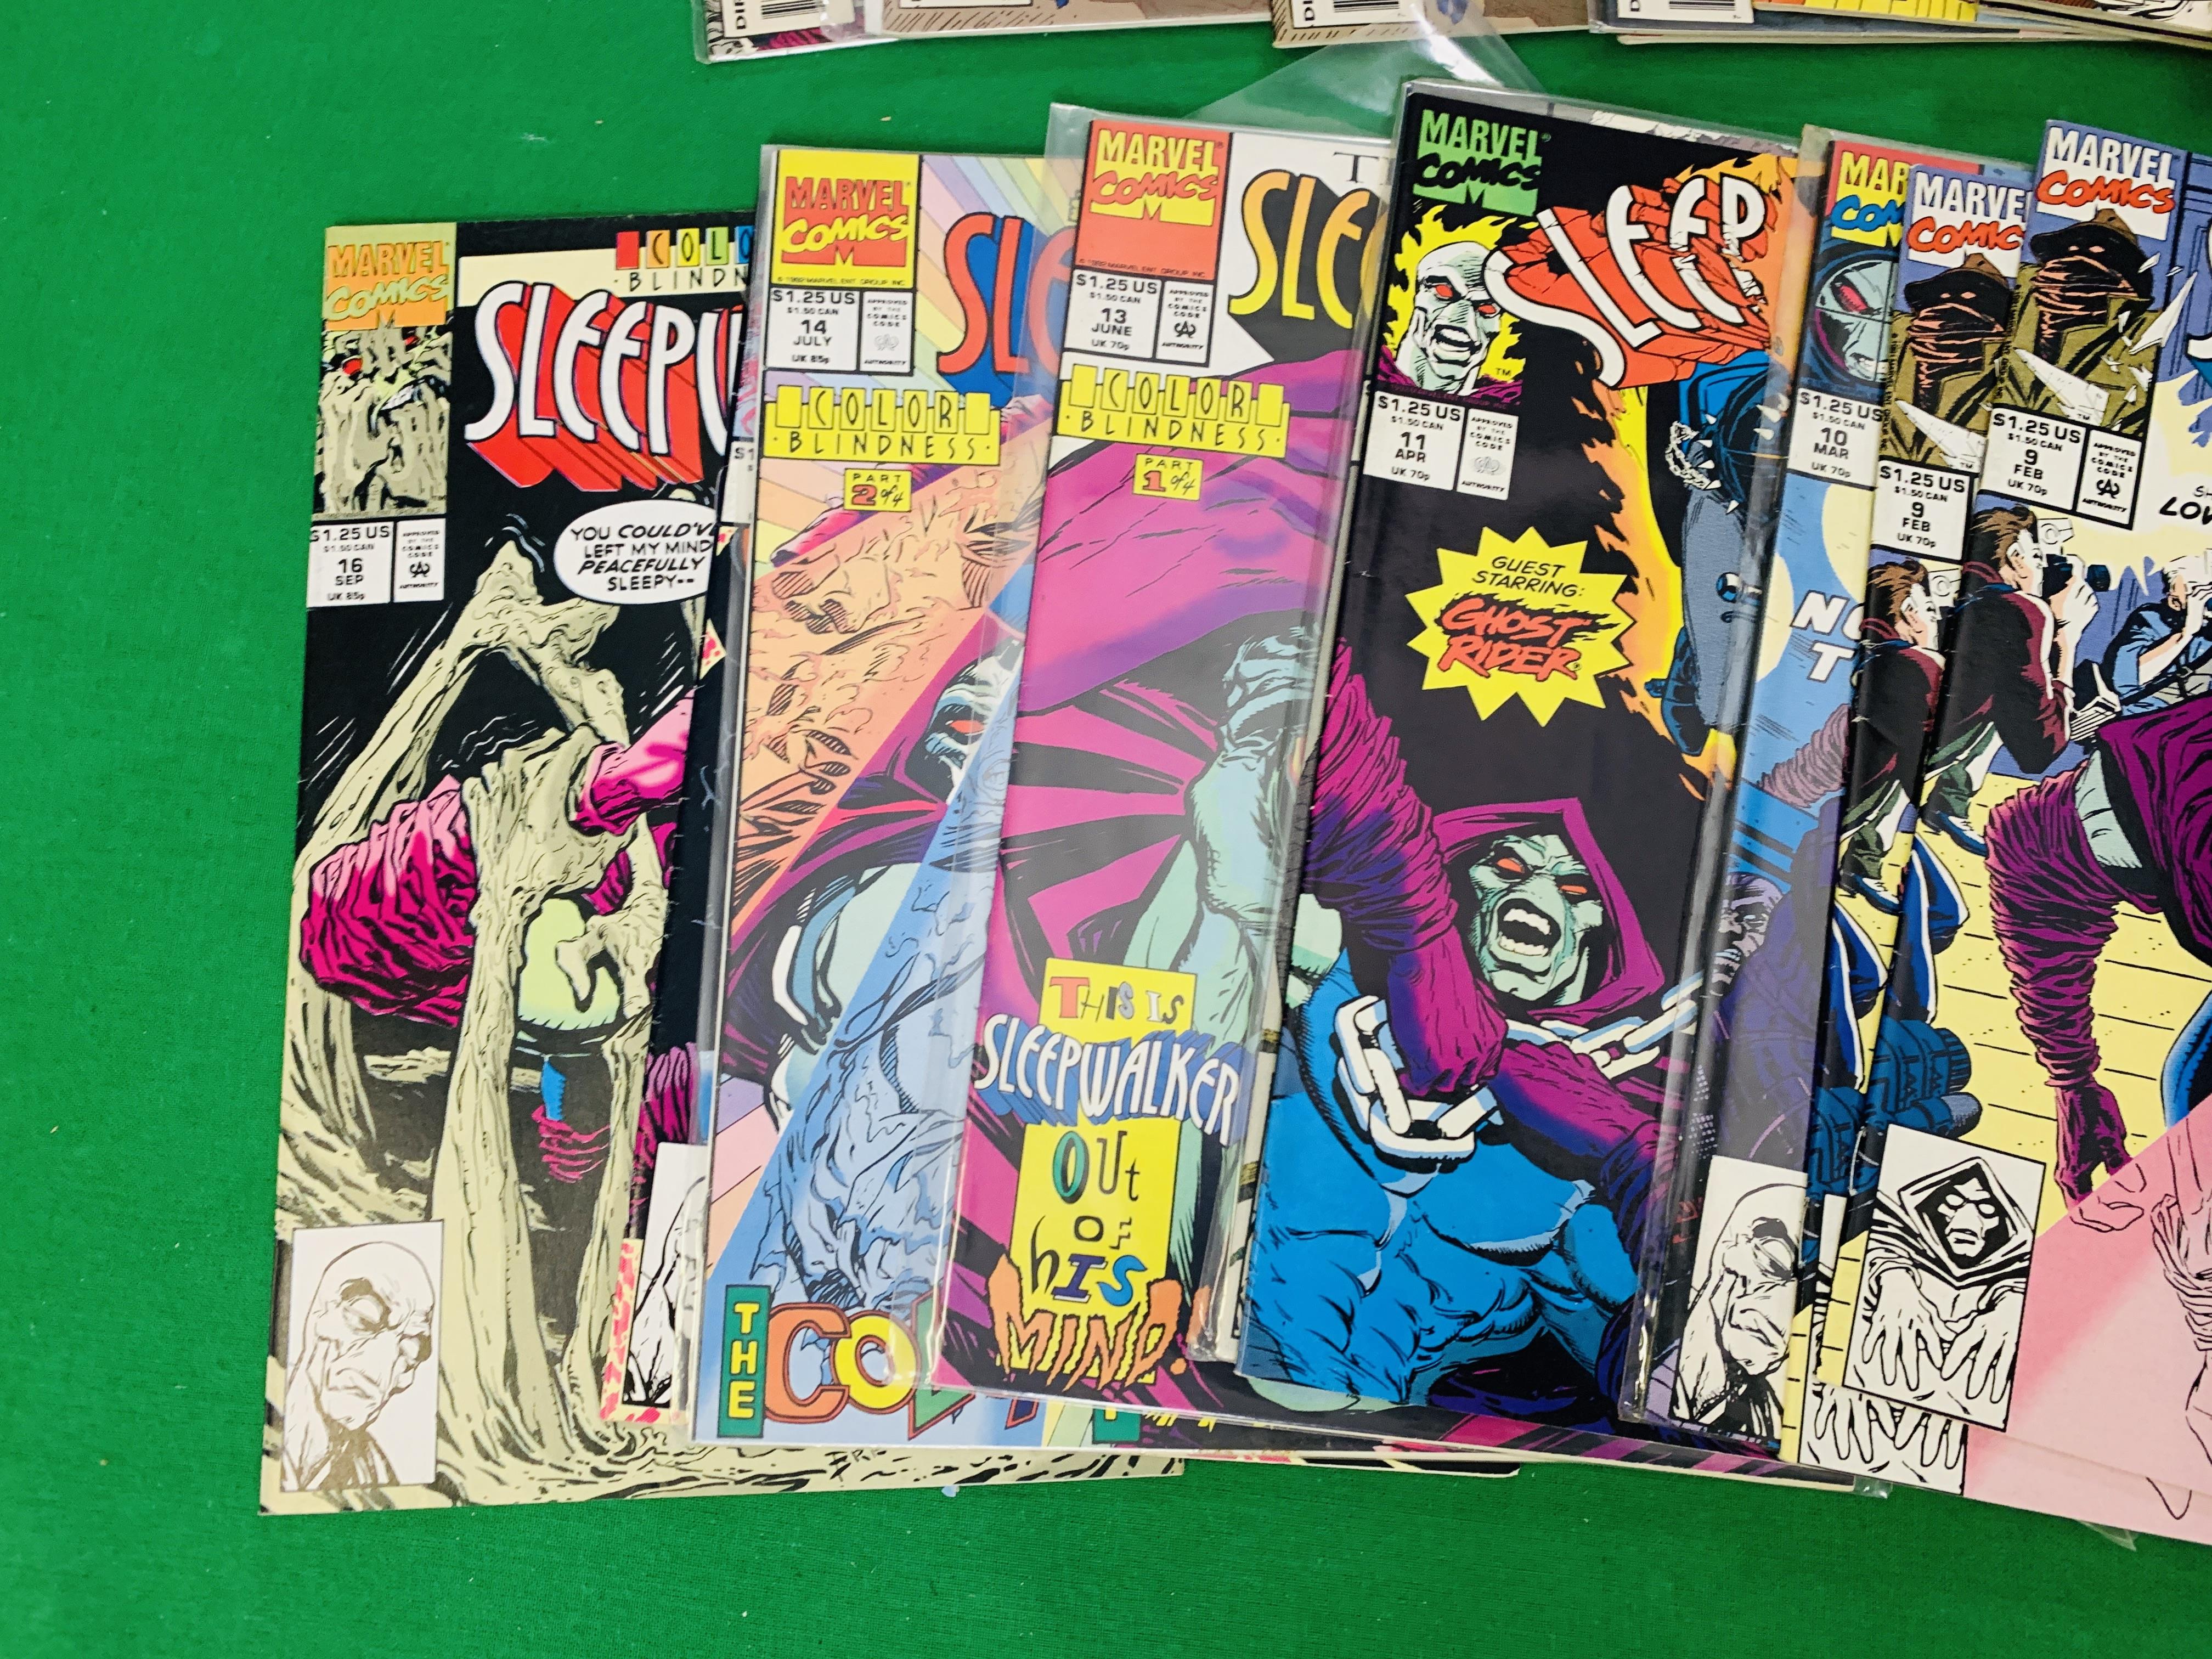 MARVEL COMICS SLEEPWALKER NO. 1 - 33 FROM 1991, FIRST APPEARANCE NO. - Image 4 of 7